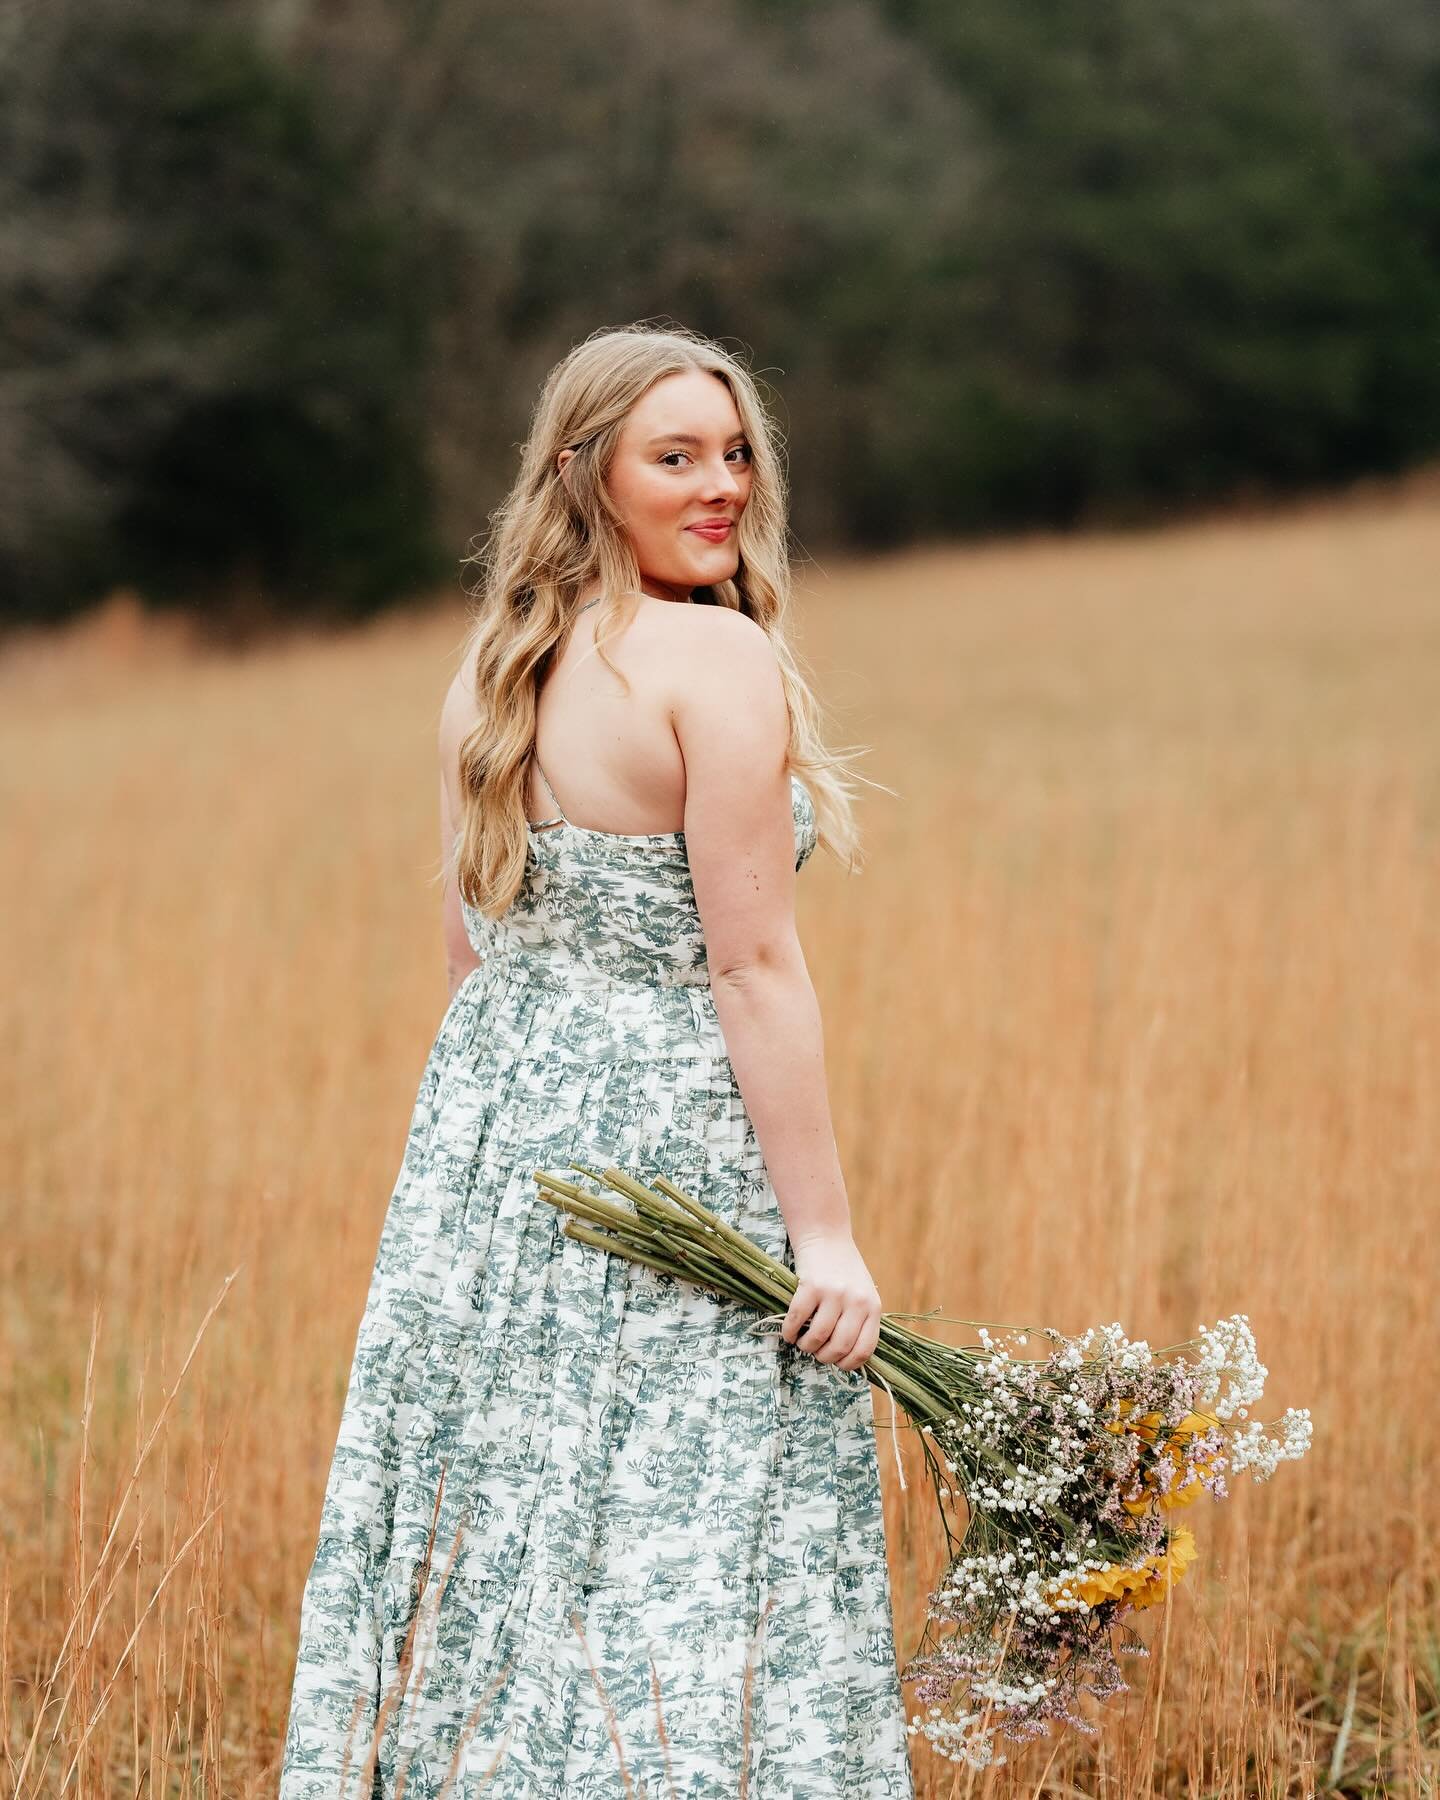 I&rsquo;m loving how much a simple bouquet can add to a senior session! These flowers were gorgeous, but not quite as much as the beautiful miss Emory💐✨